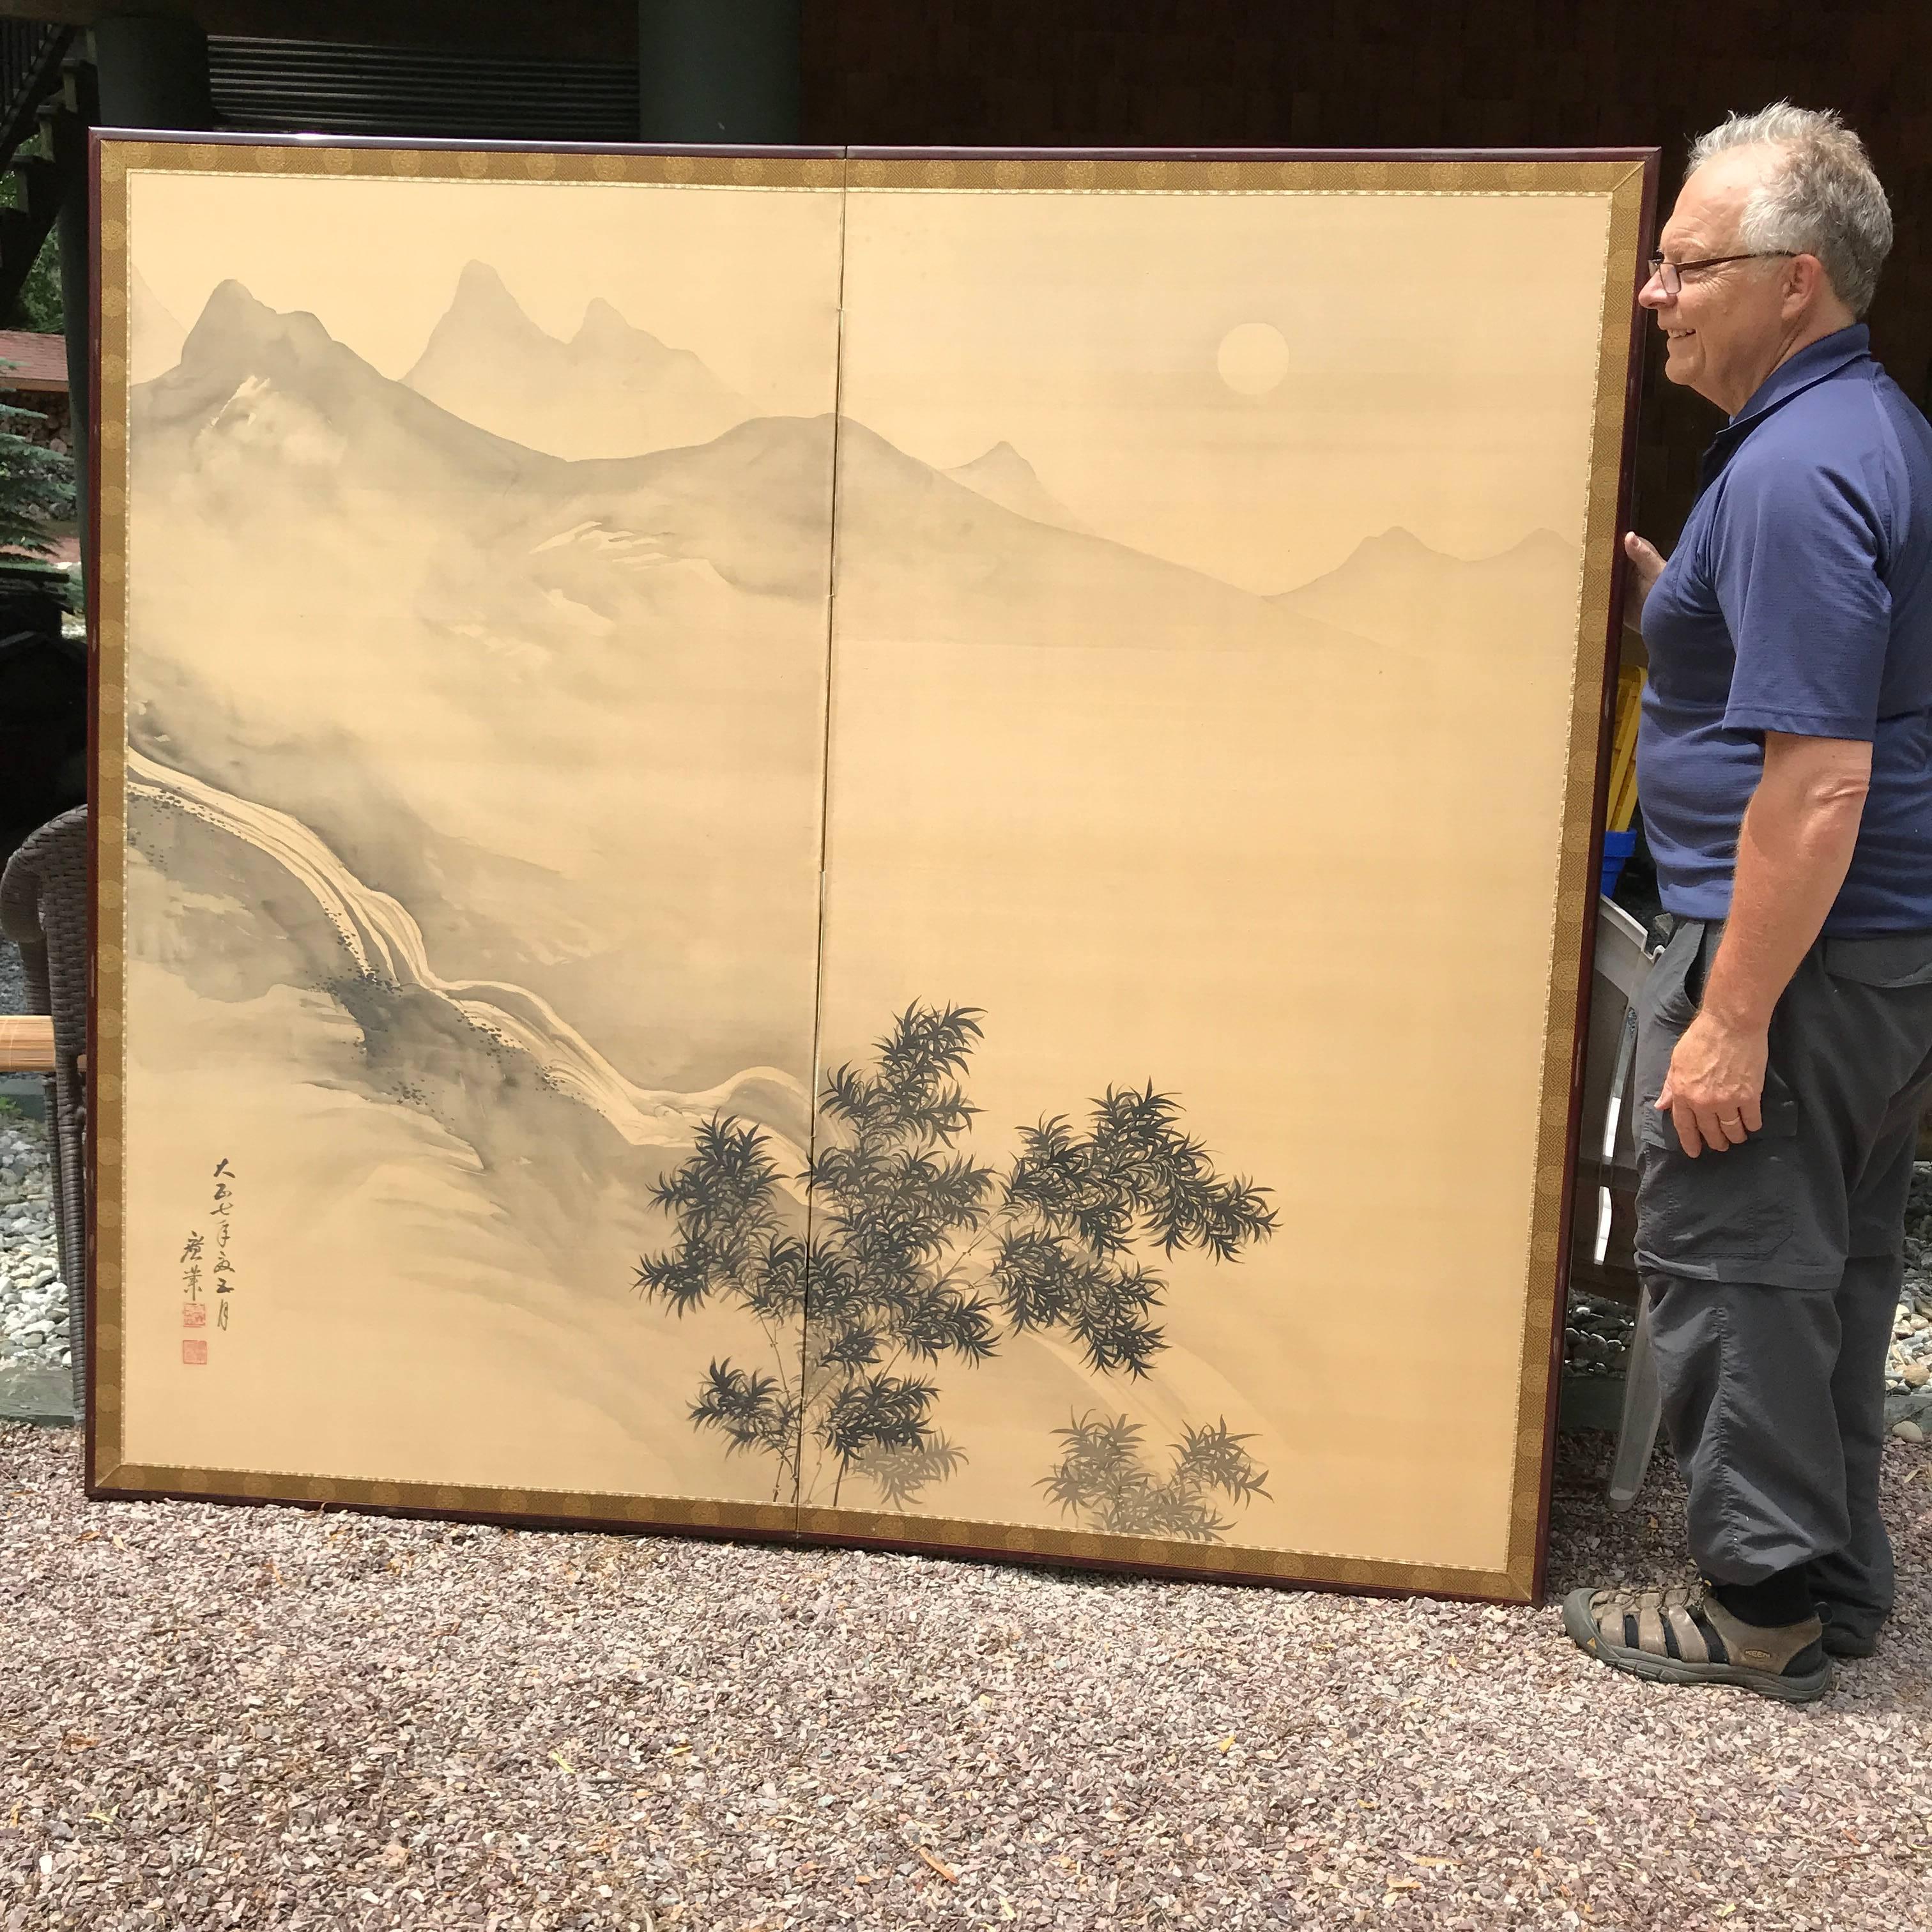 Japan, a fine two-panel screen Byobu of simple brush strokes on cream ground paper, in a serene, peaceful mood of a rising moon over mountains a waterfall and bamboo. 

It dates Taisho 7 (1918) 

It is signed Kougyou.

Enticing and unusual